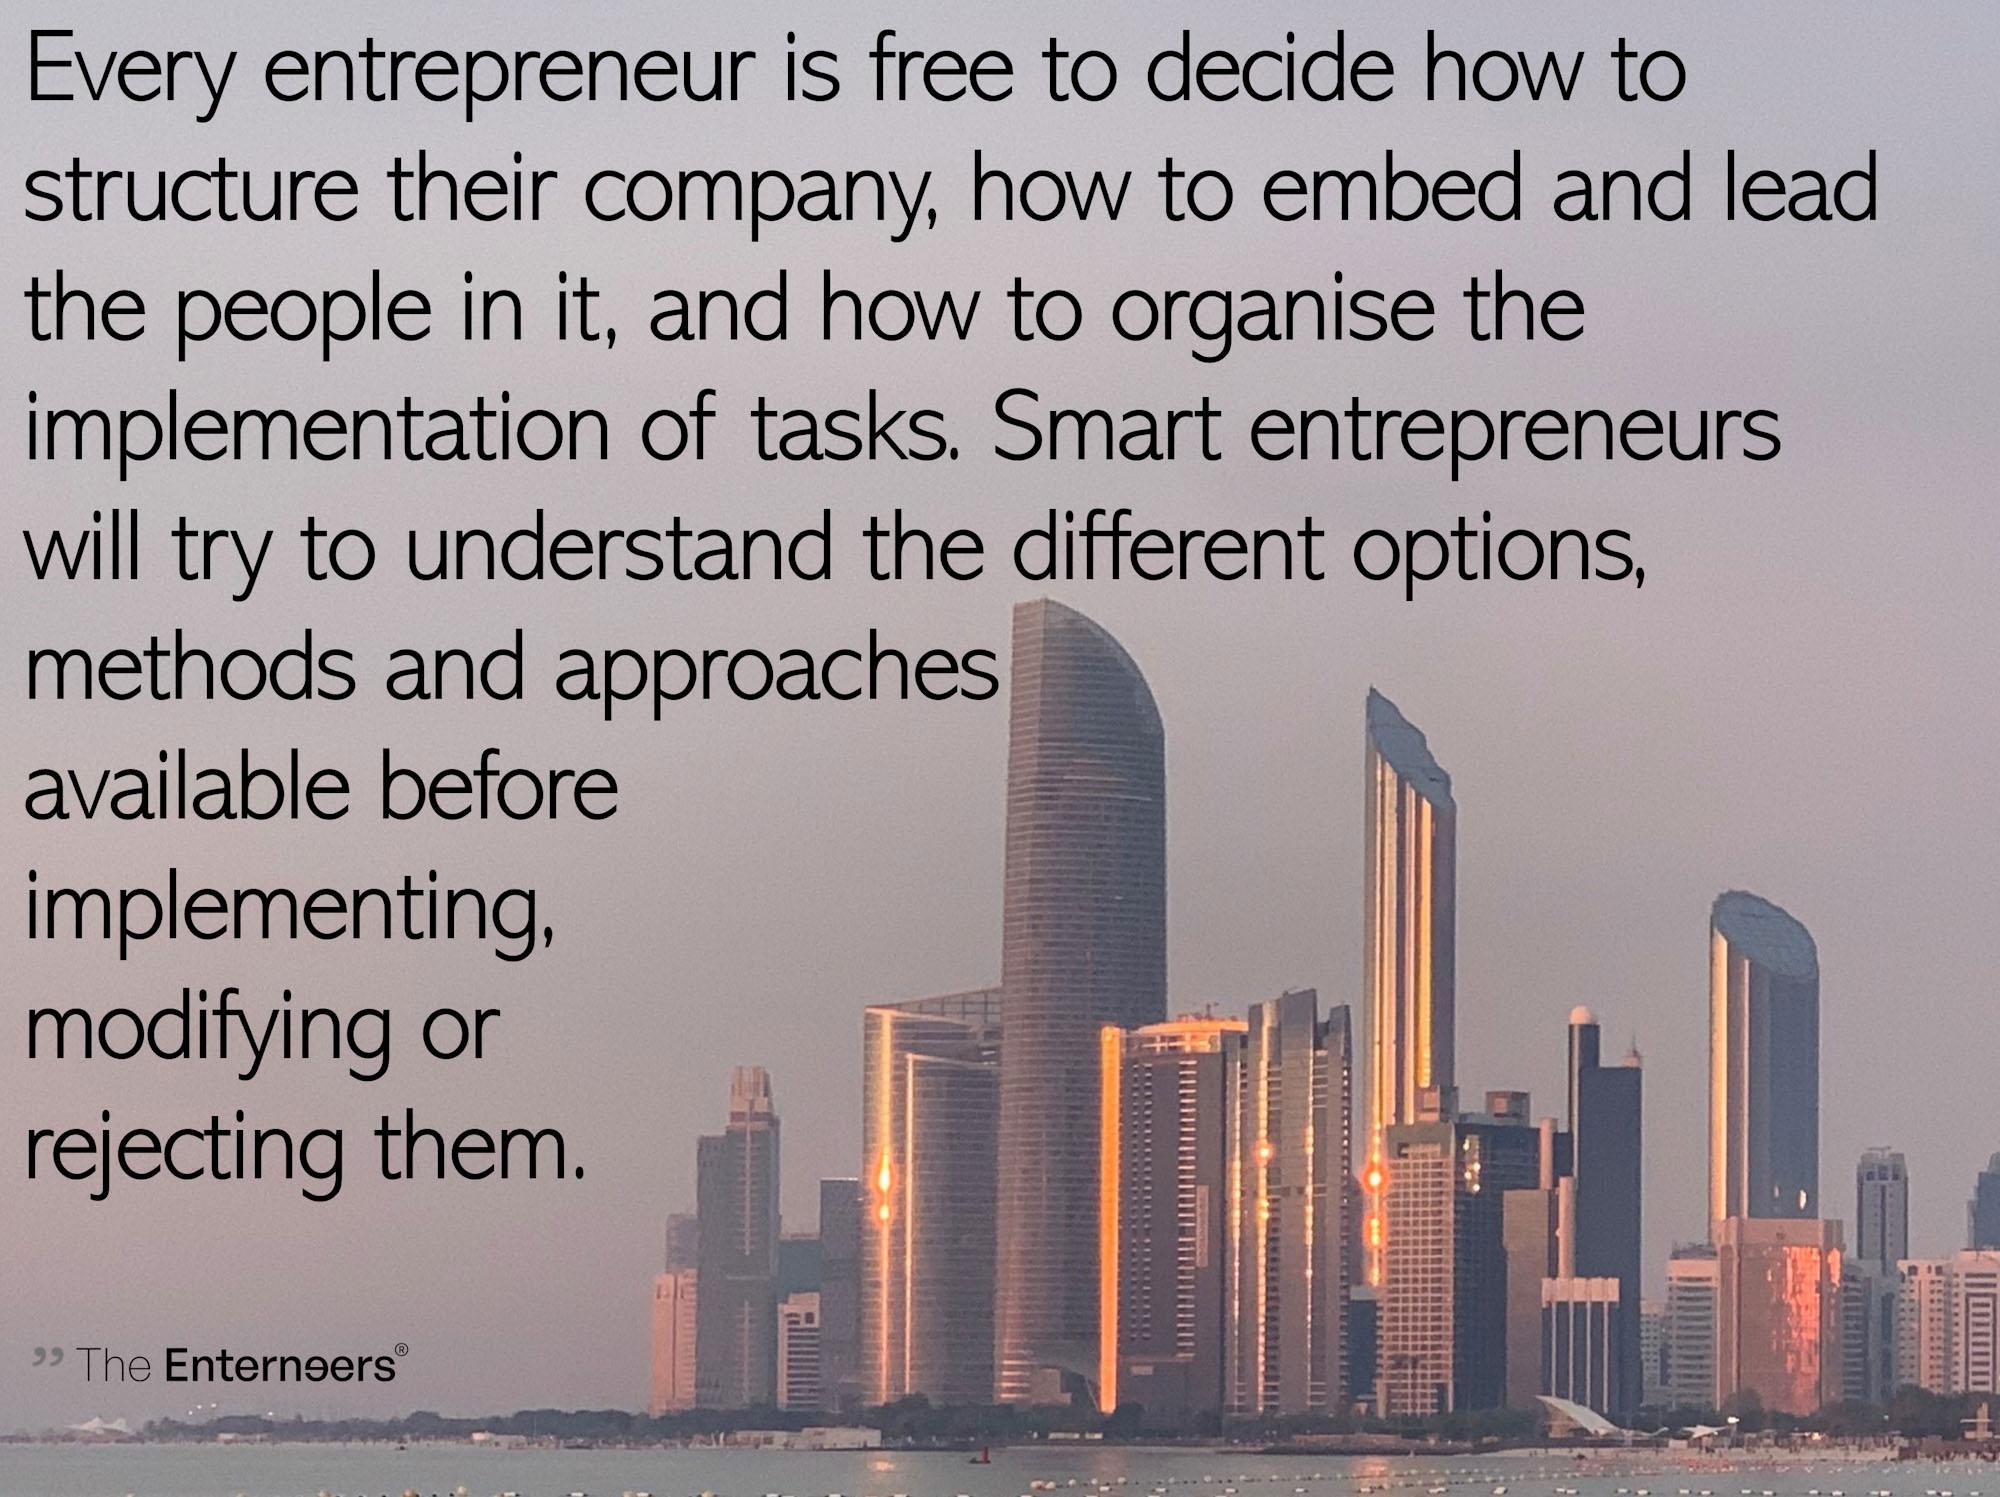 Entrepreneurs understand approaches before implementing, modifying or rejecting them